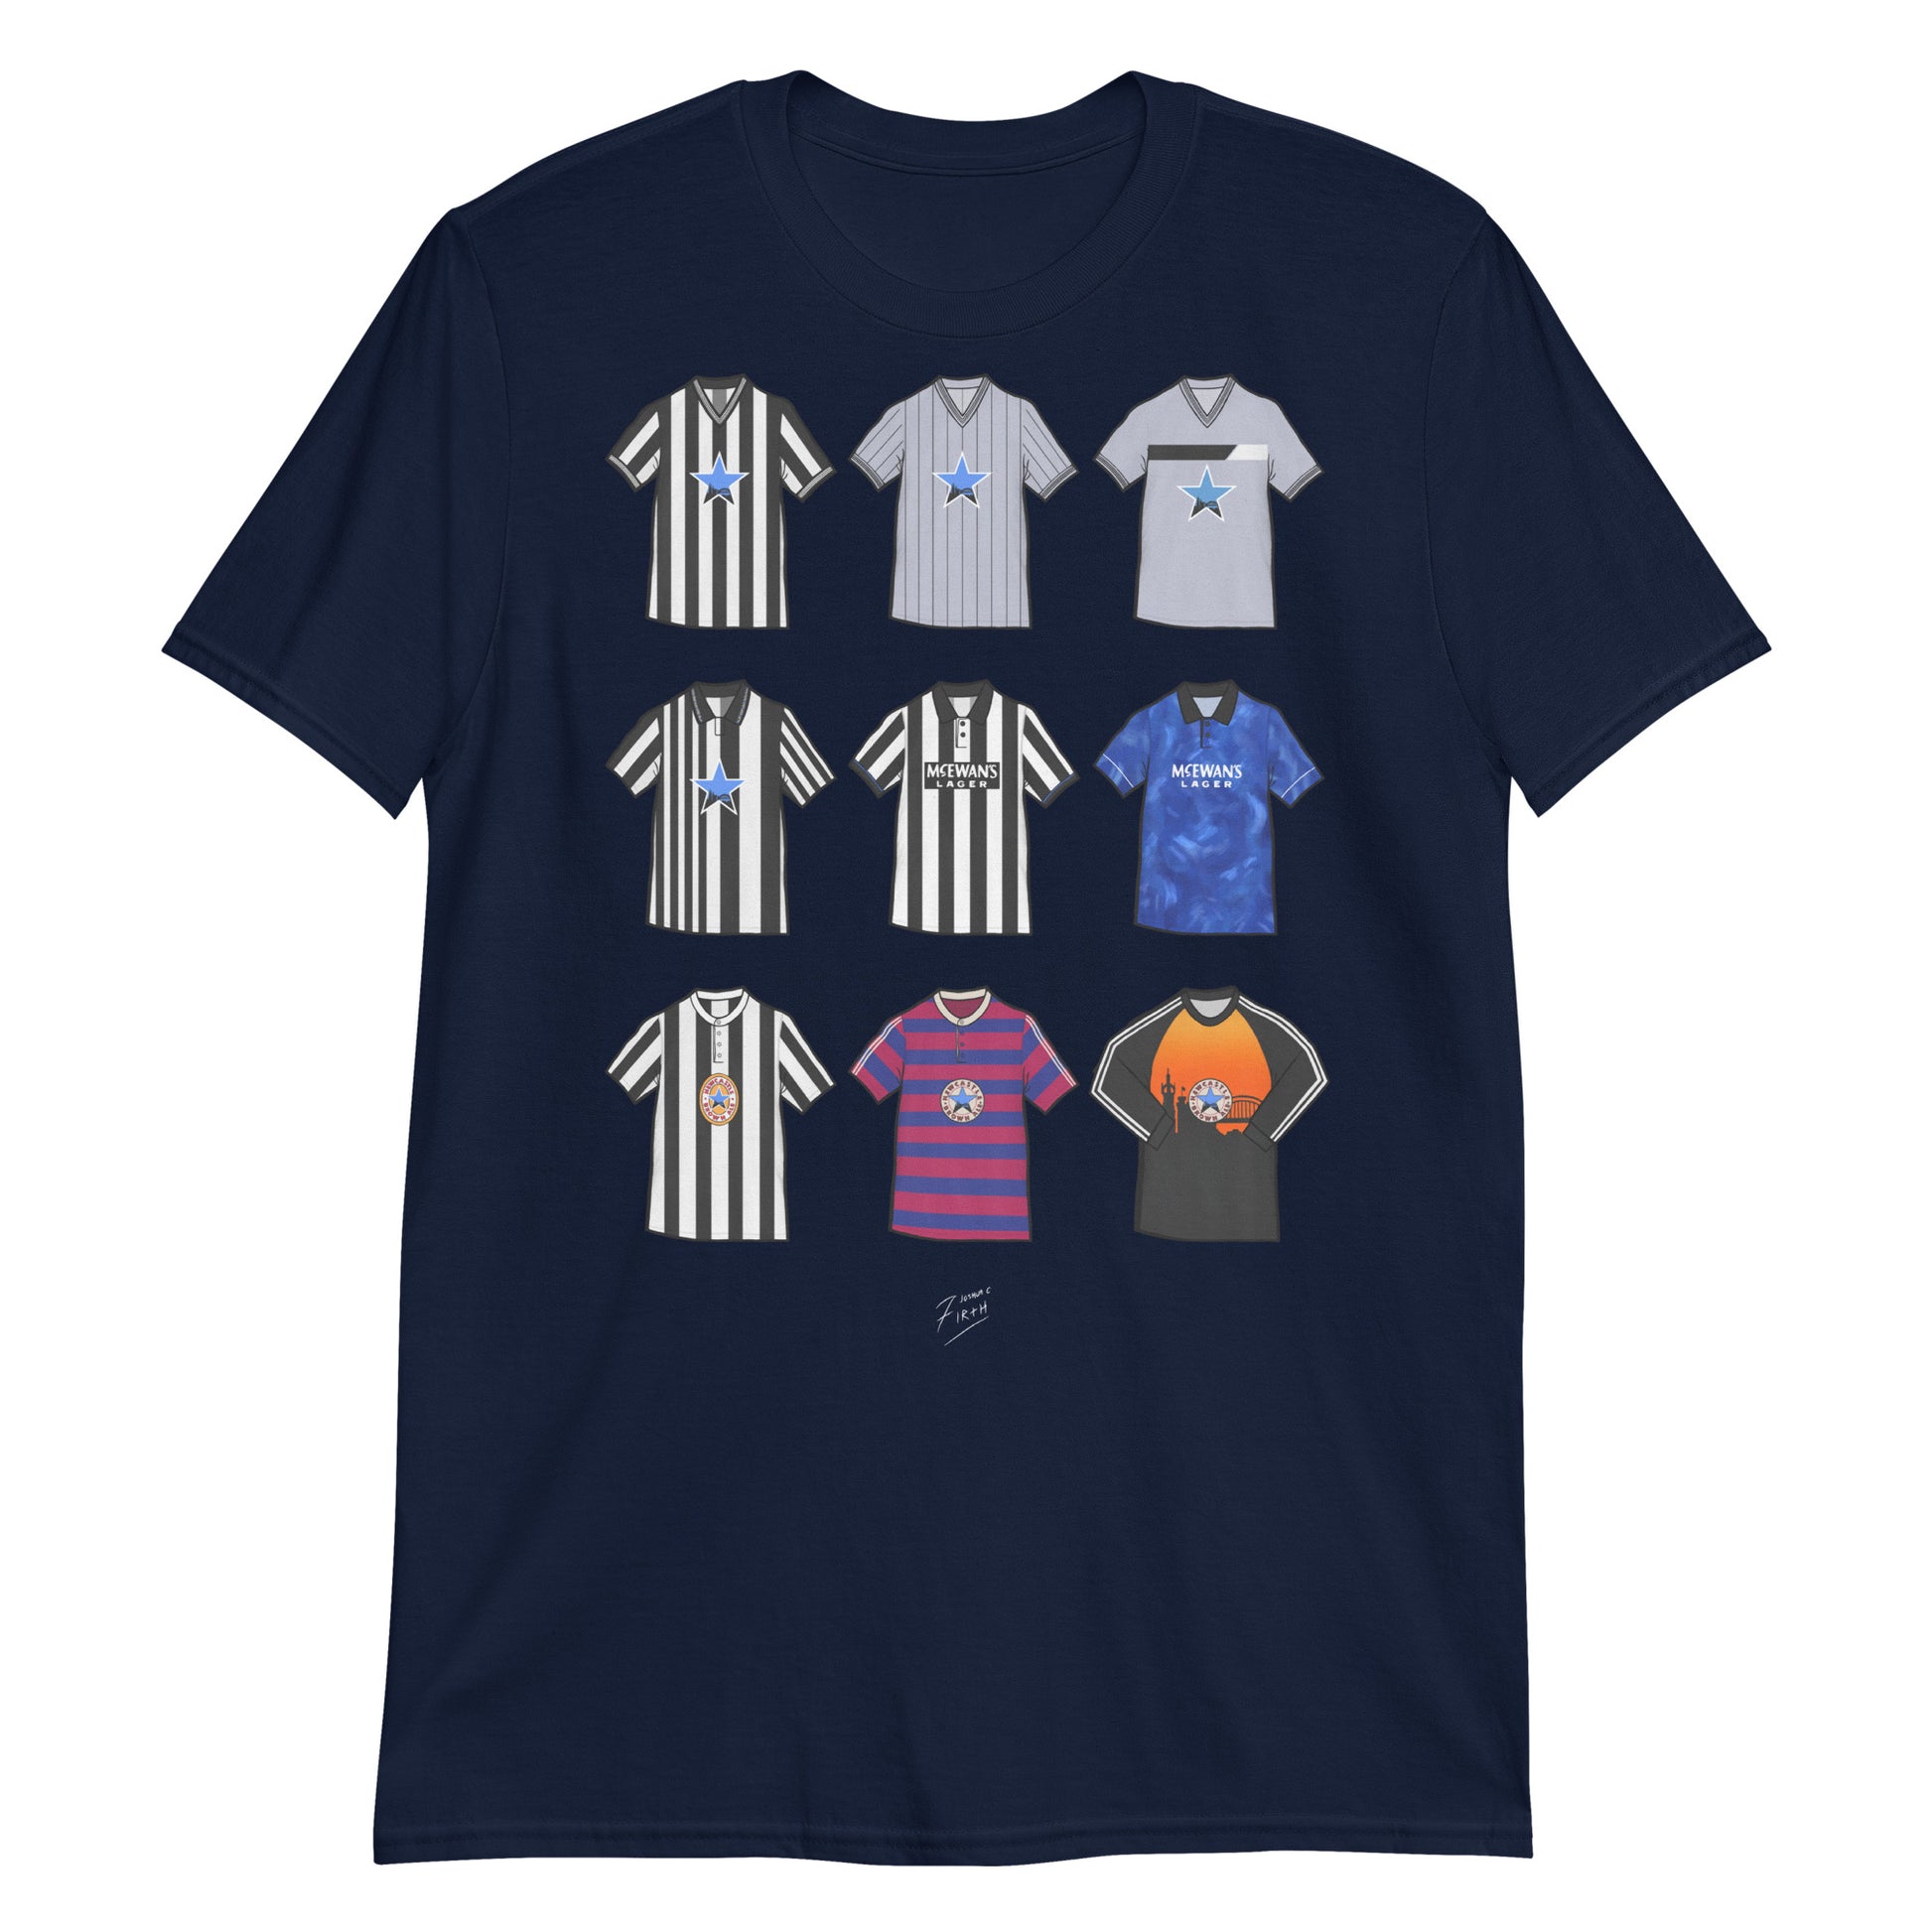 Navy Blue T-shirt inspired by Newcastle United jersey's of the past, retro Iconic designs